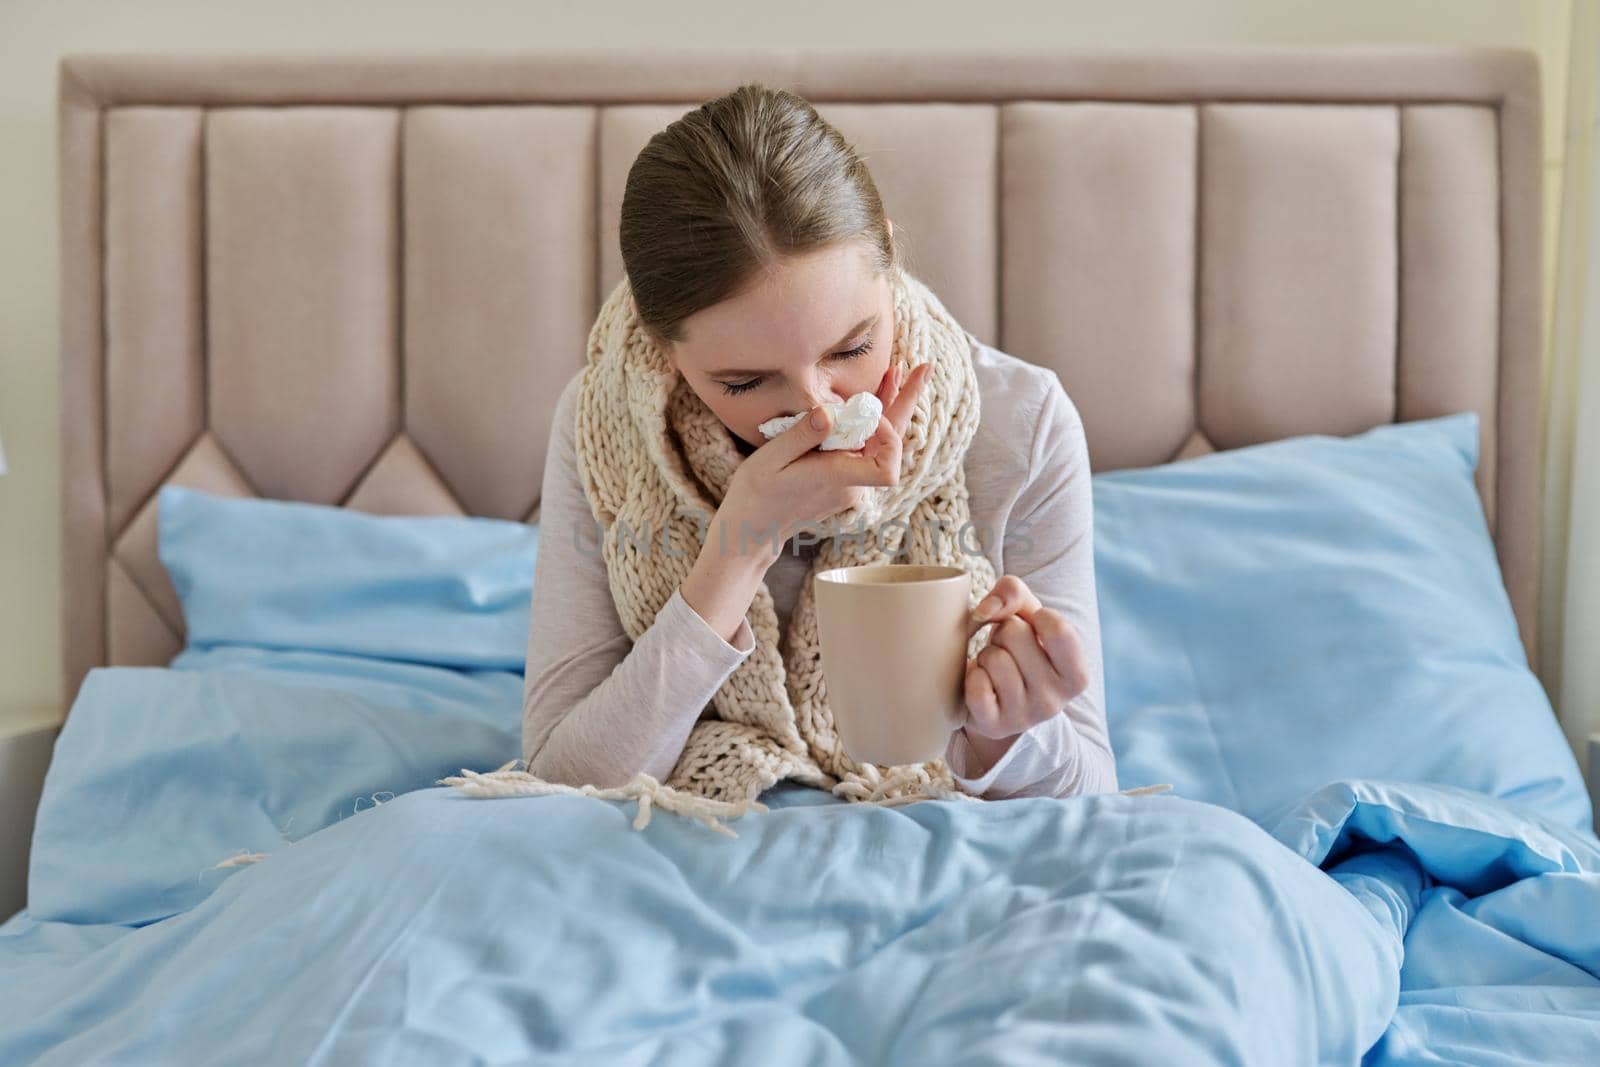 Sick young woman in bed with handkerchief and cup. Flu season, seasonal viral diseases, health, medicine, get sick at home, bed rest, people concept